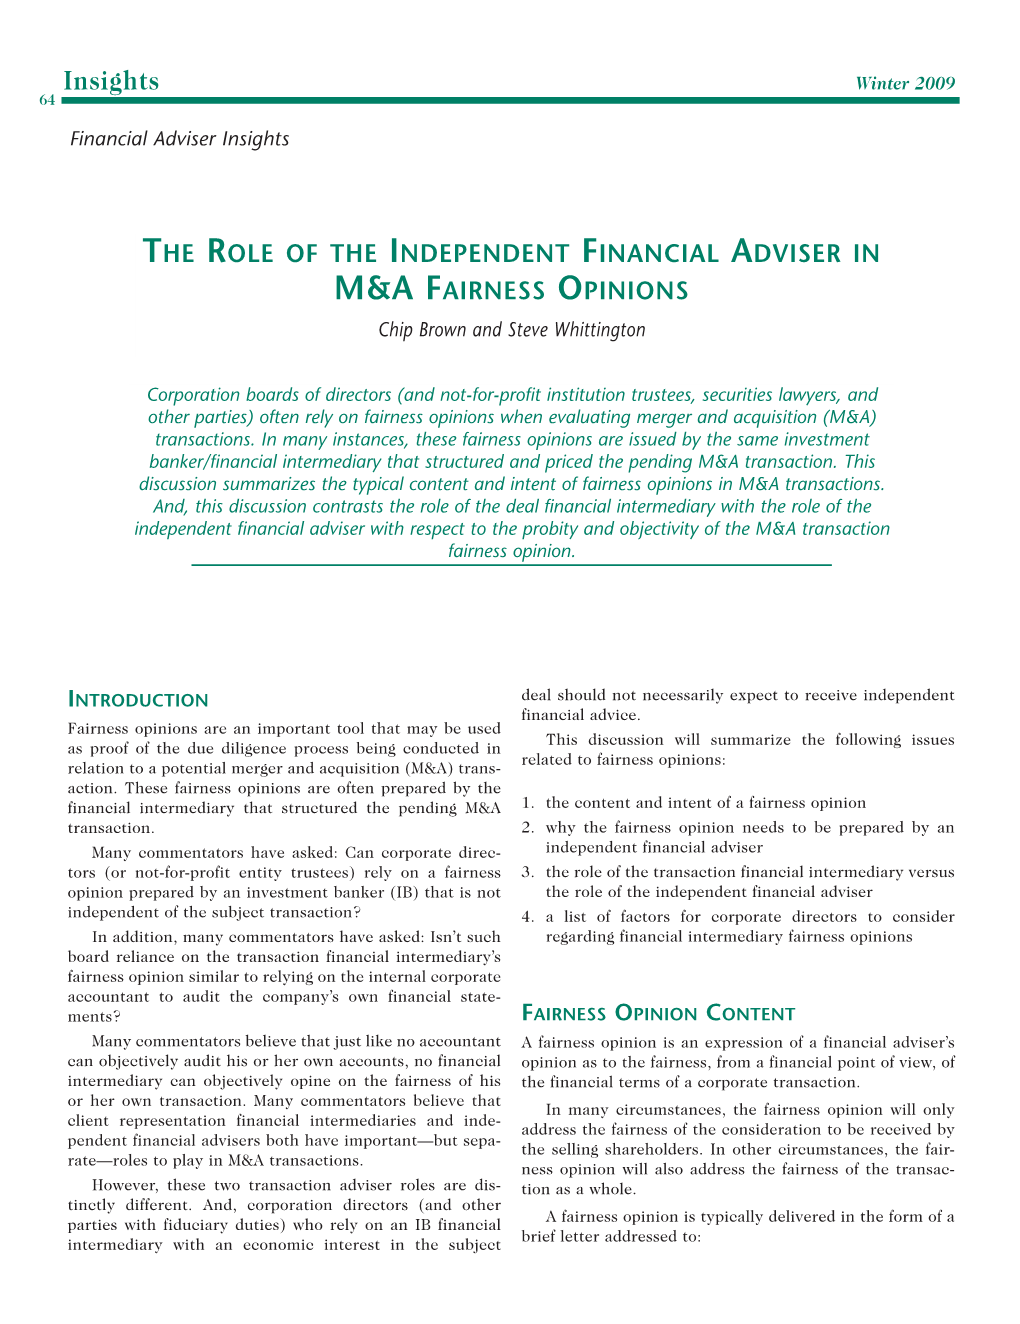 The Role of the Independent Financial Adviser in M&A Fairness Opinions